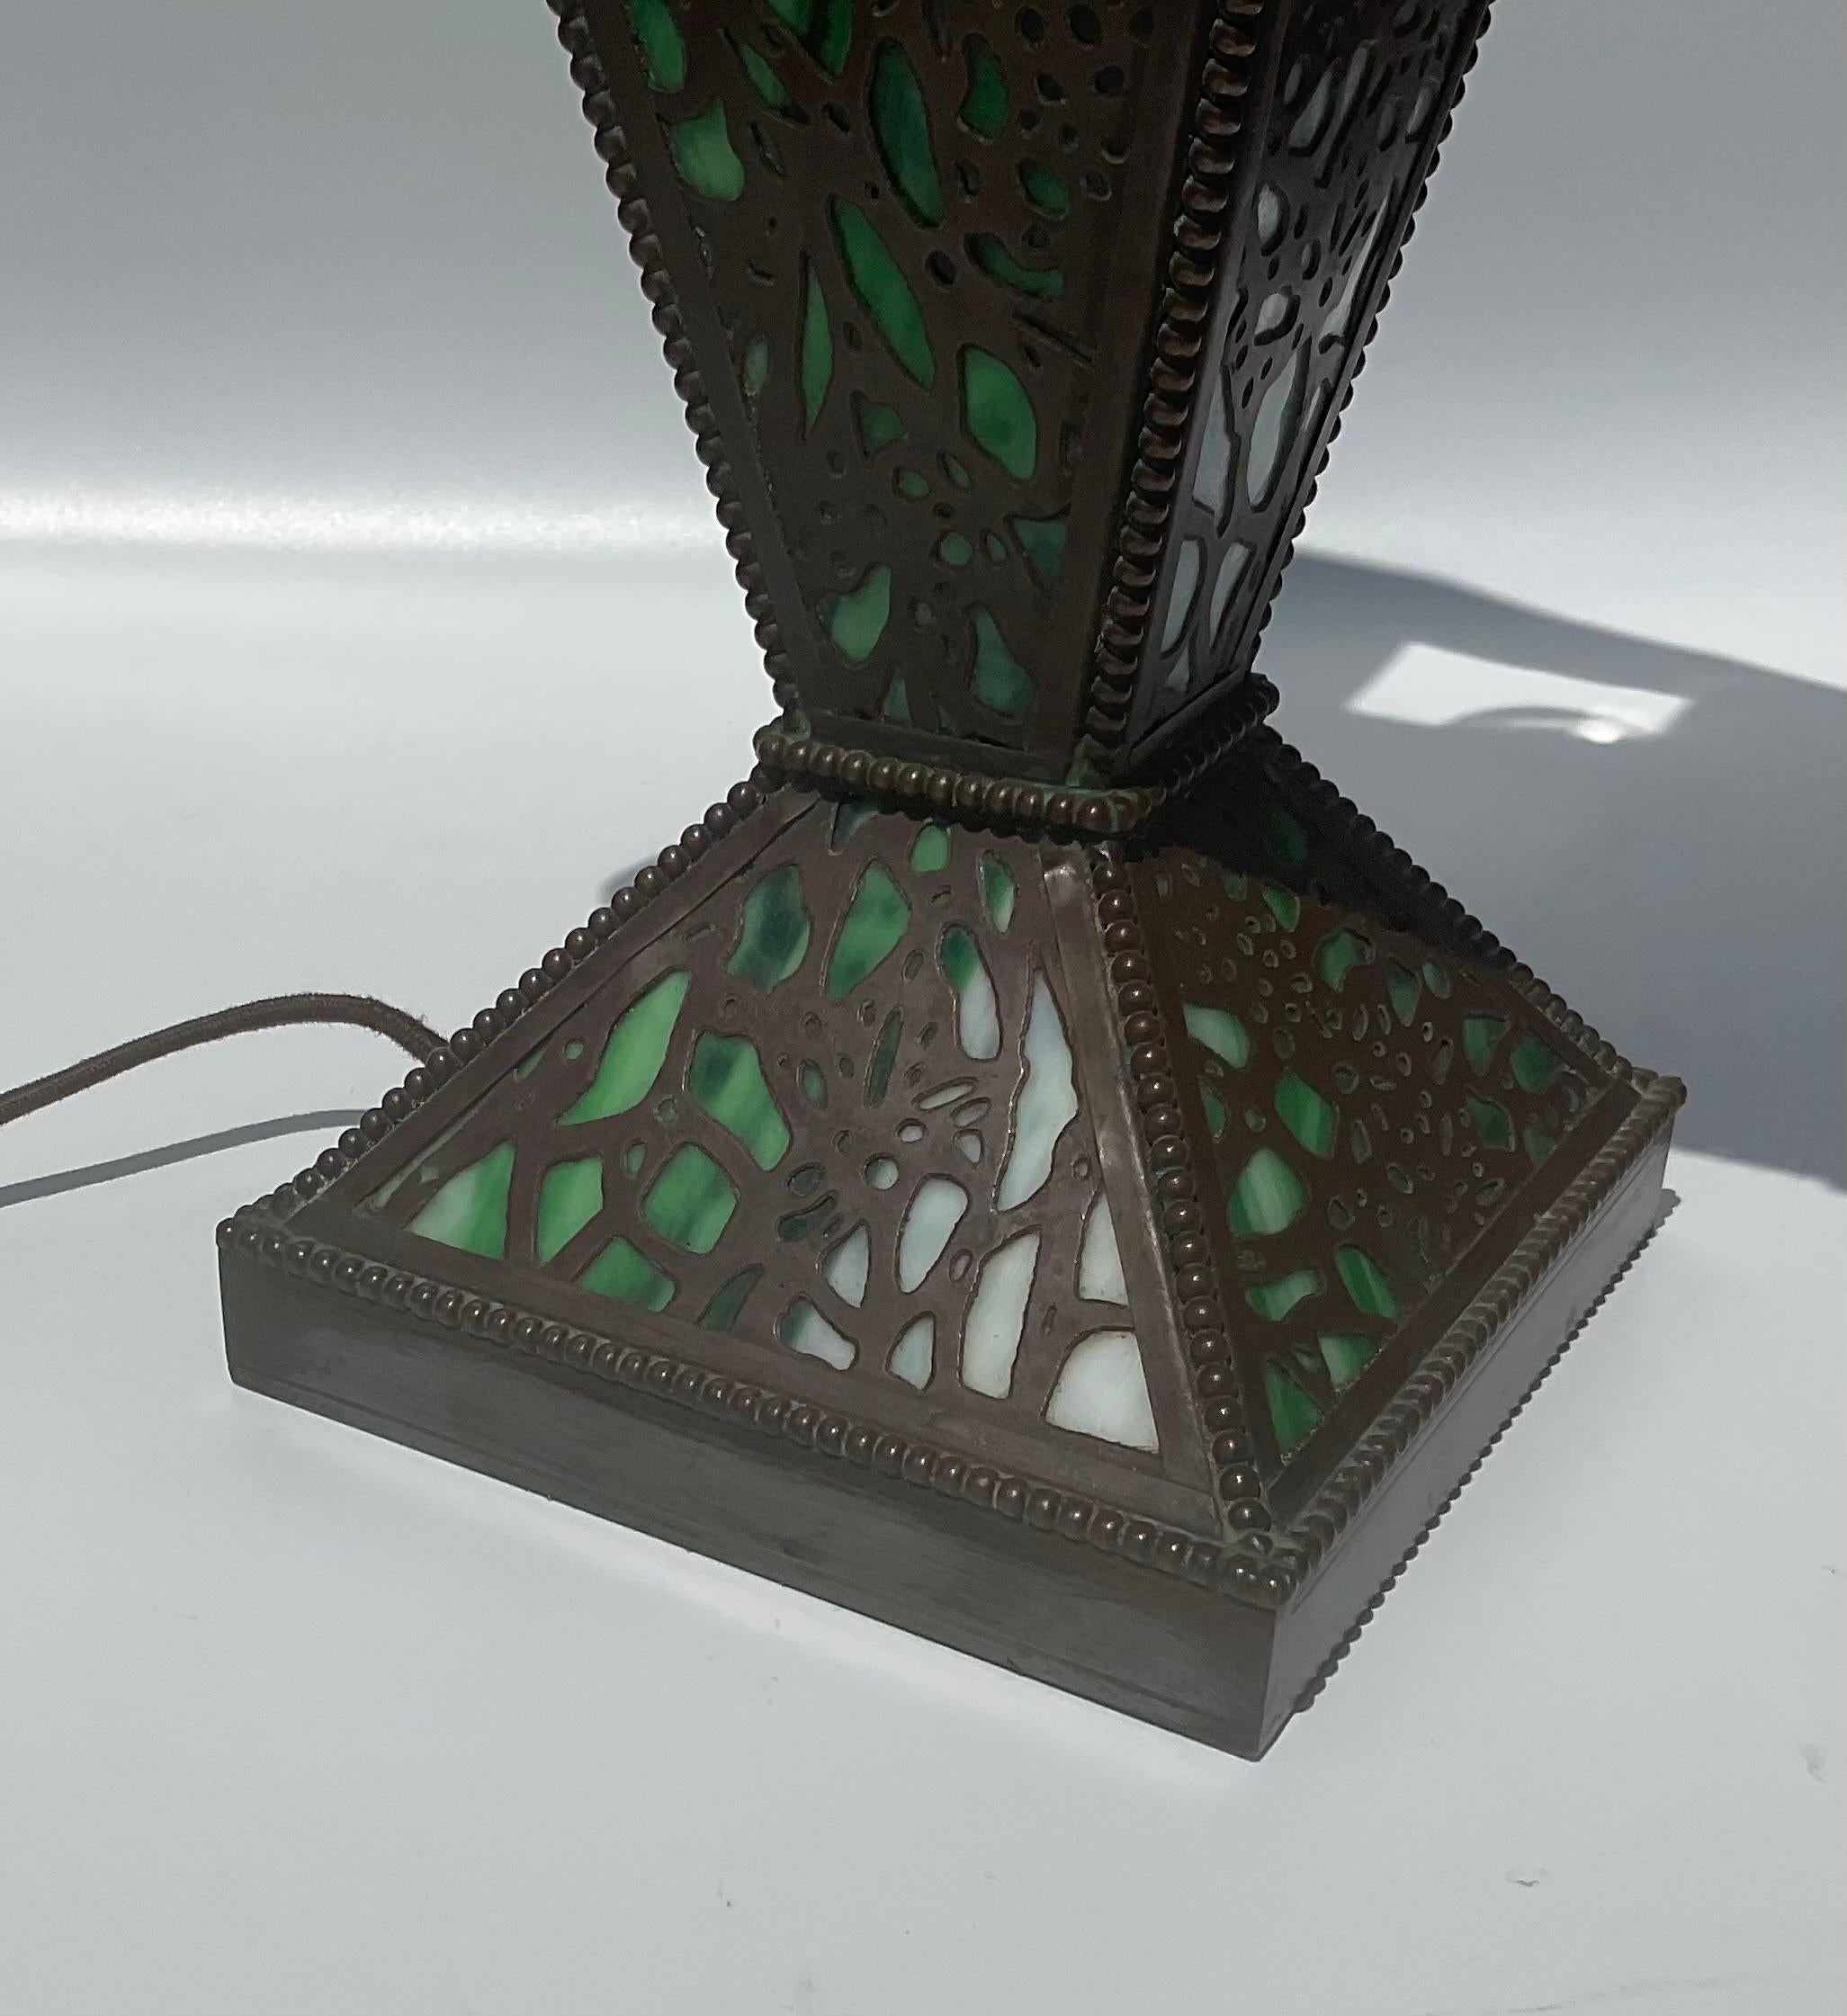 Rivière Studios Grapevine Pattern Early Art Nouveau panel Lamp Made in the style of Tiffany Studios. The lamp glows nicely on any table. A rare find.